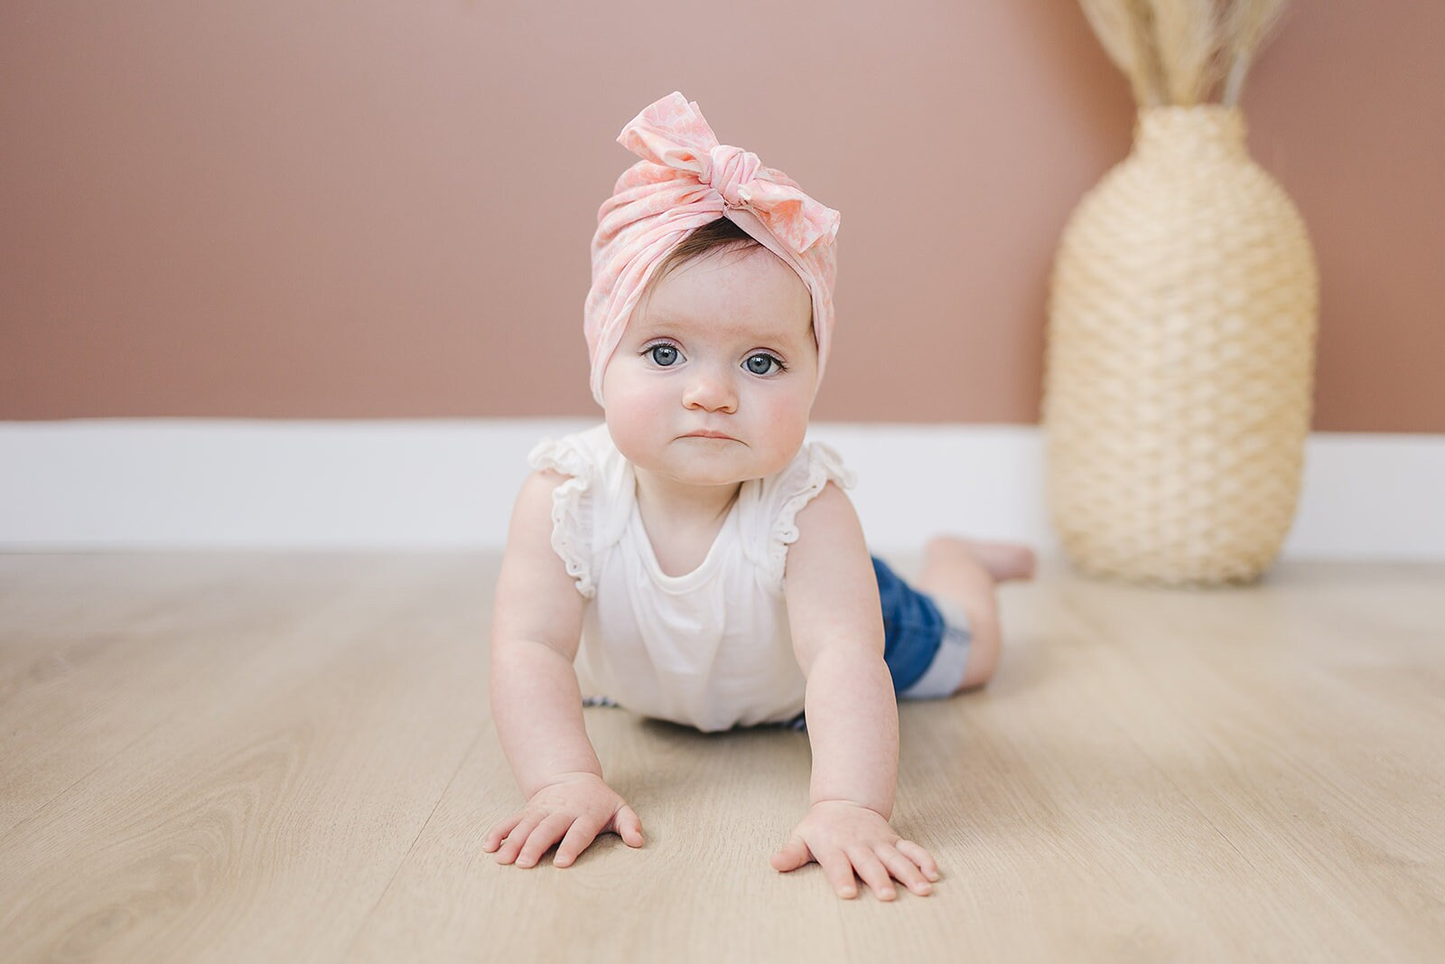 Pink Summer Floral Baby Bow Turban